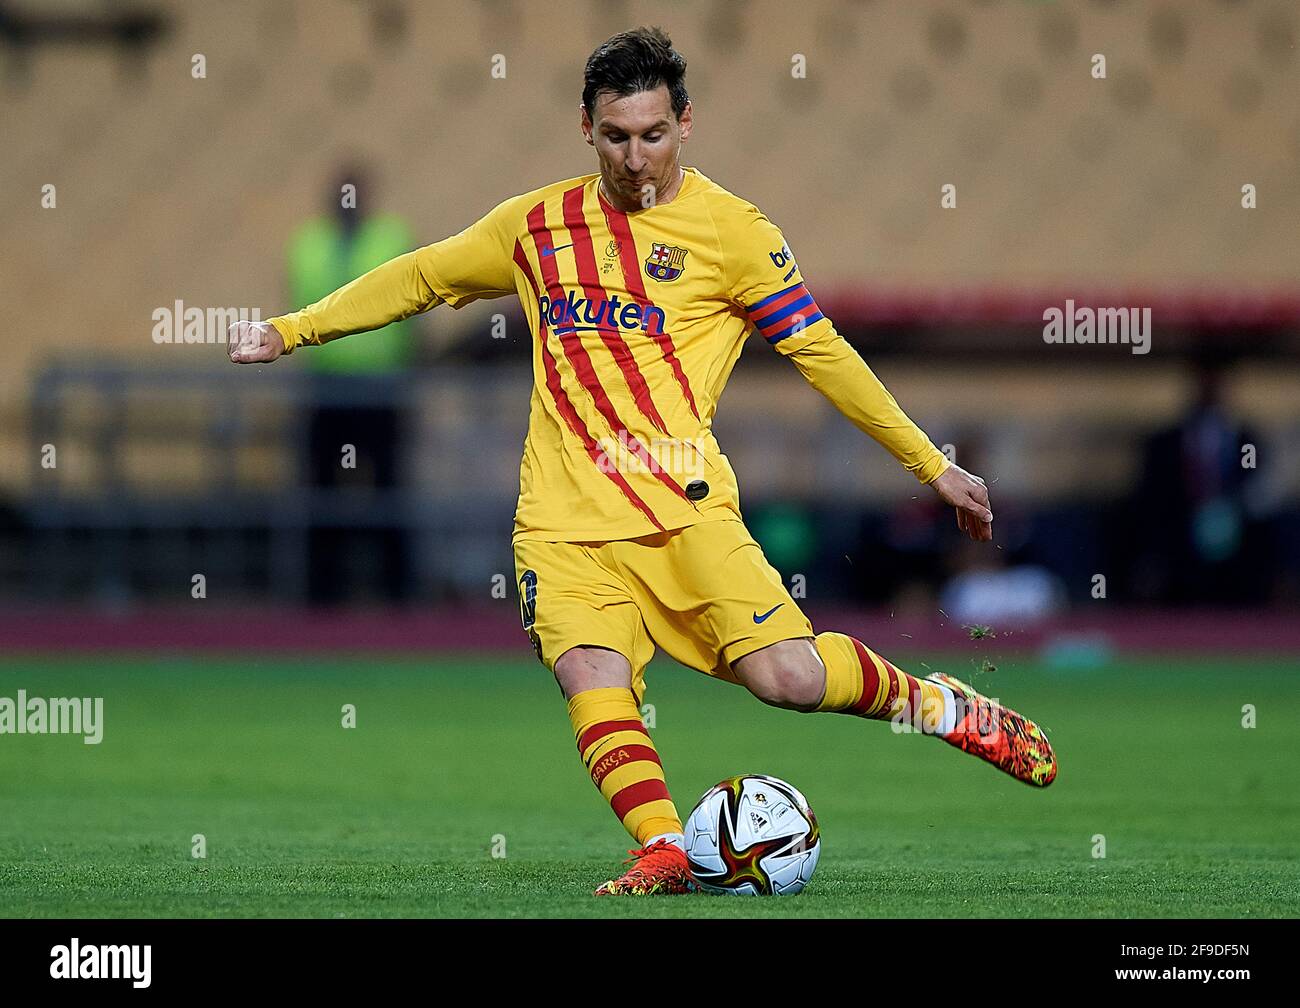 Seville, Spain. 17th Apr, 2021. Lionel Messi of FC Barcelona competes during the 2020-21 season Spanish King's Cup final match between Athletic Bilbao and FC Barcelona in Seville, Spain, on April 17, 2021. Credit: Pablo Morano/Xinhua/Alamy Live News Stock Photo